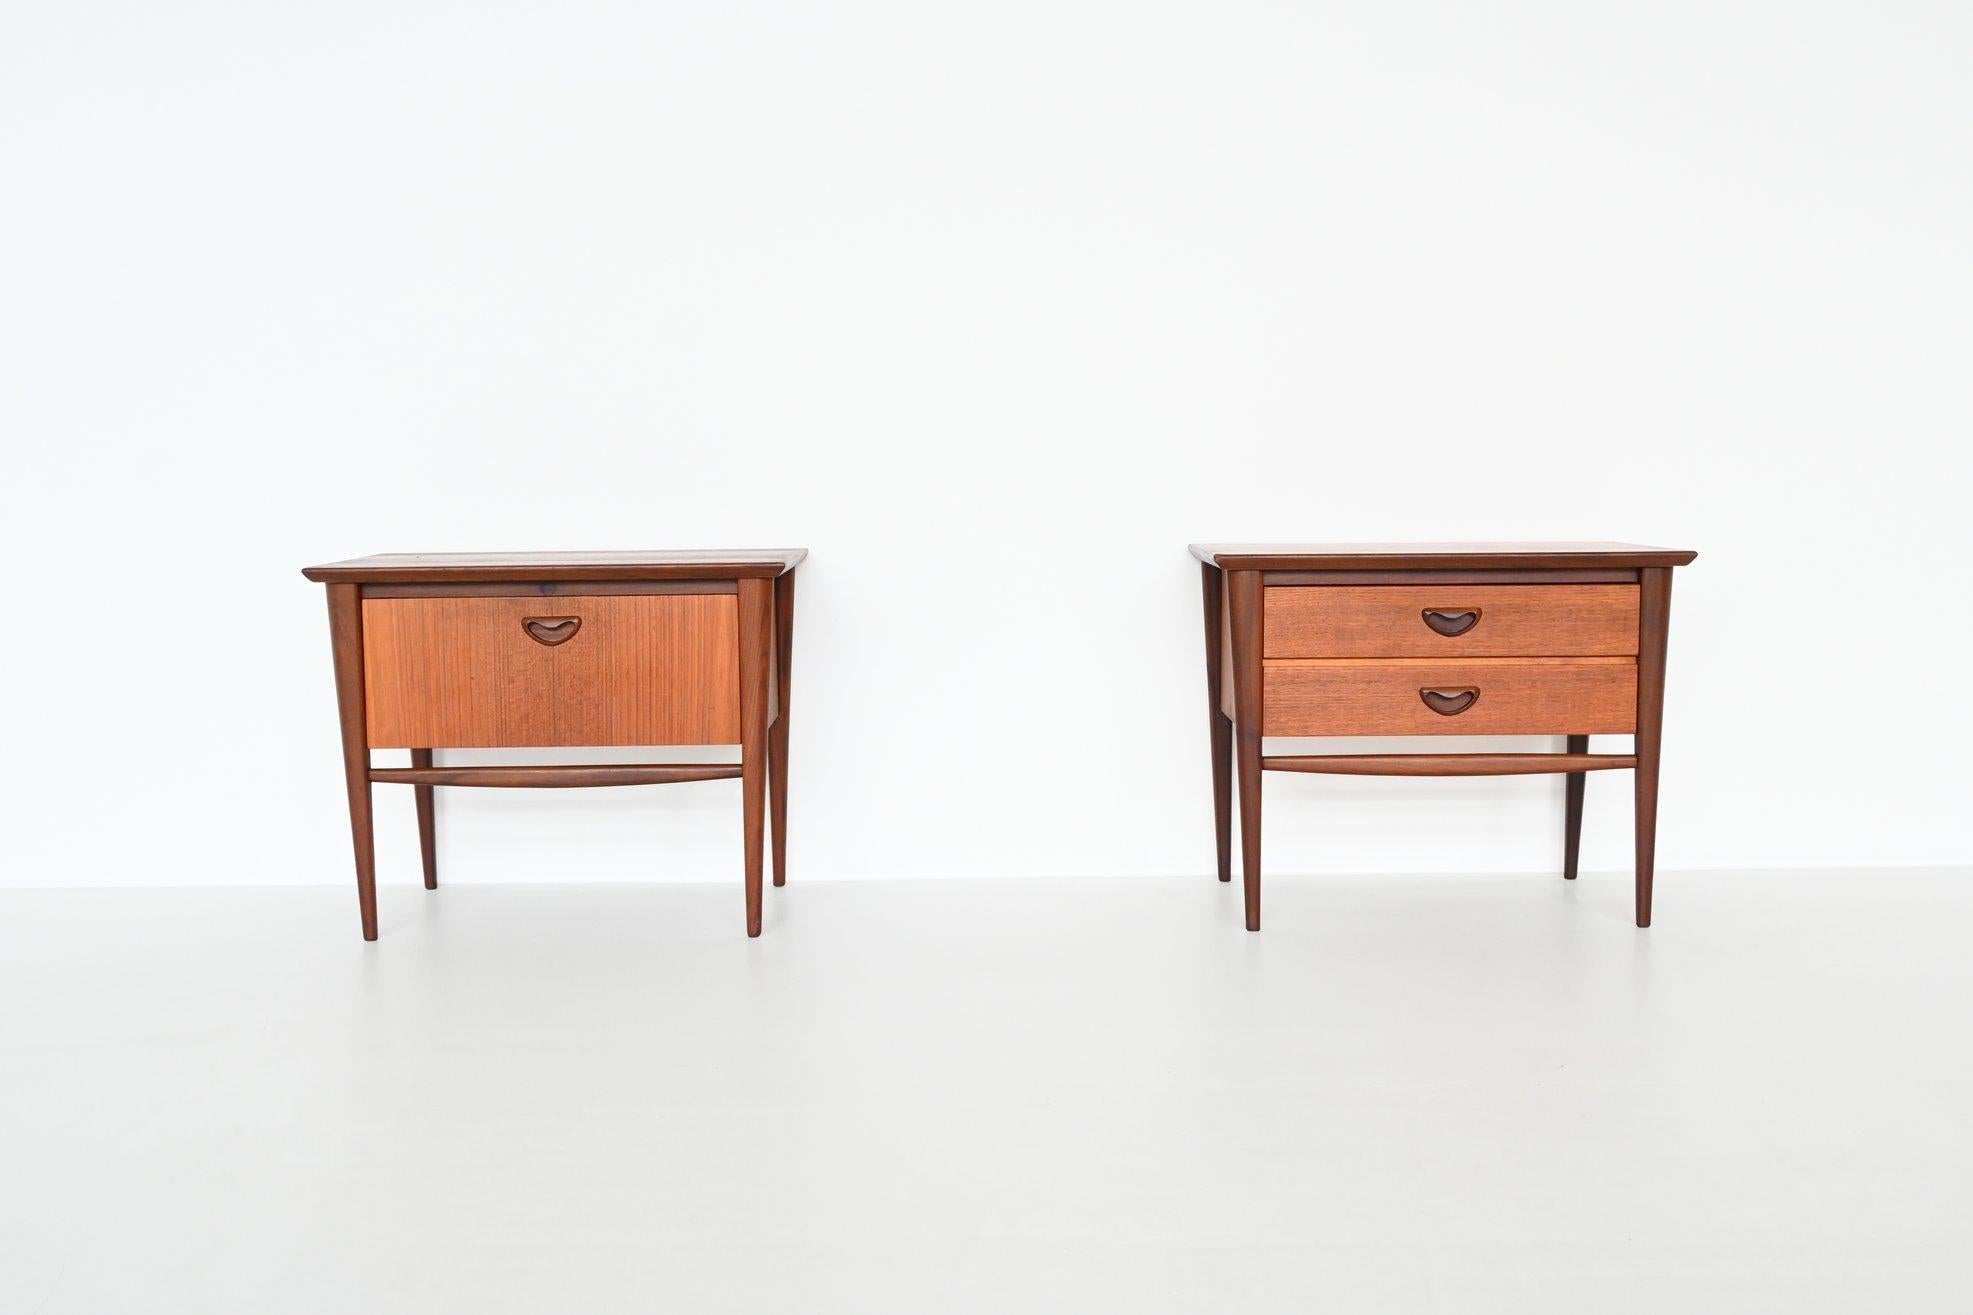 Beautiful shaped pair of nightstands designed by Louis van Teeffelen and manufactured by Webe Meubelen, The Netherlands 1960. They are made of solid and veneered teak wood. These high quality nightstands have very nice details like the well-crafted